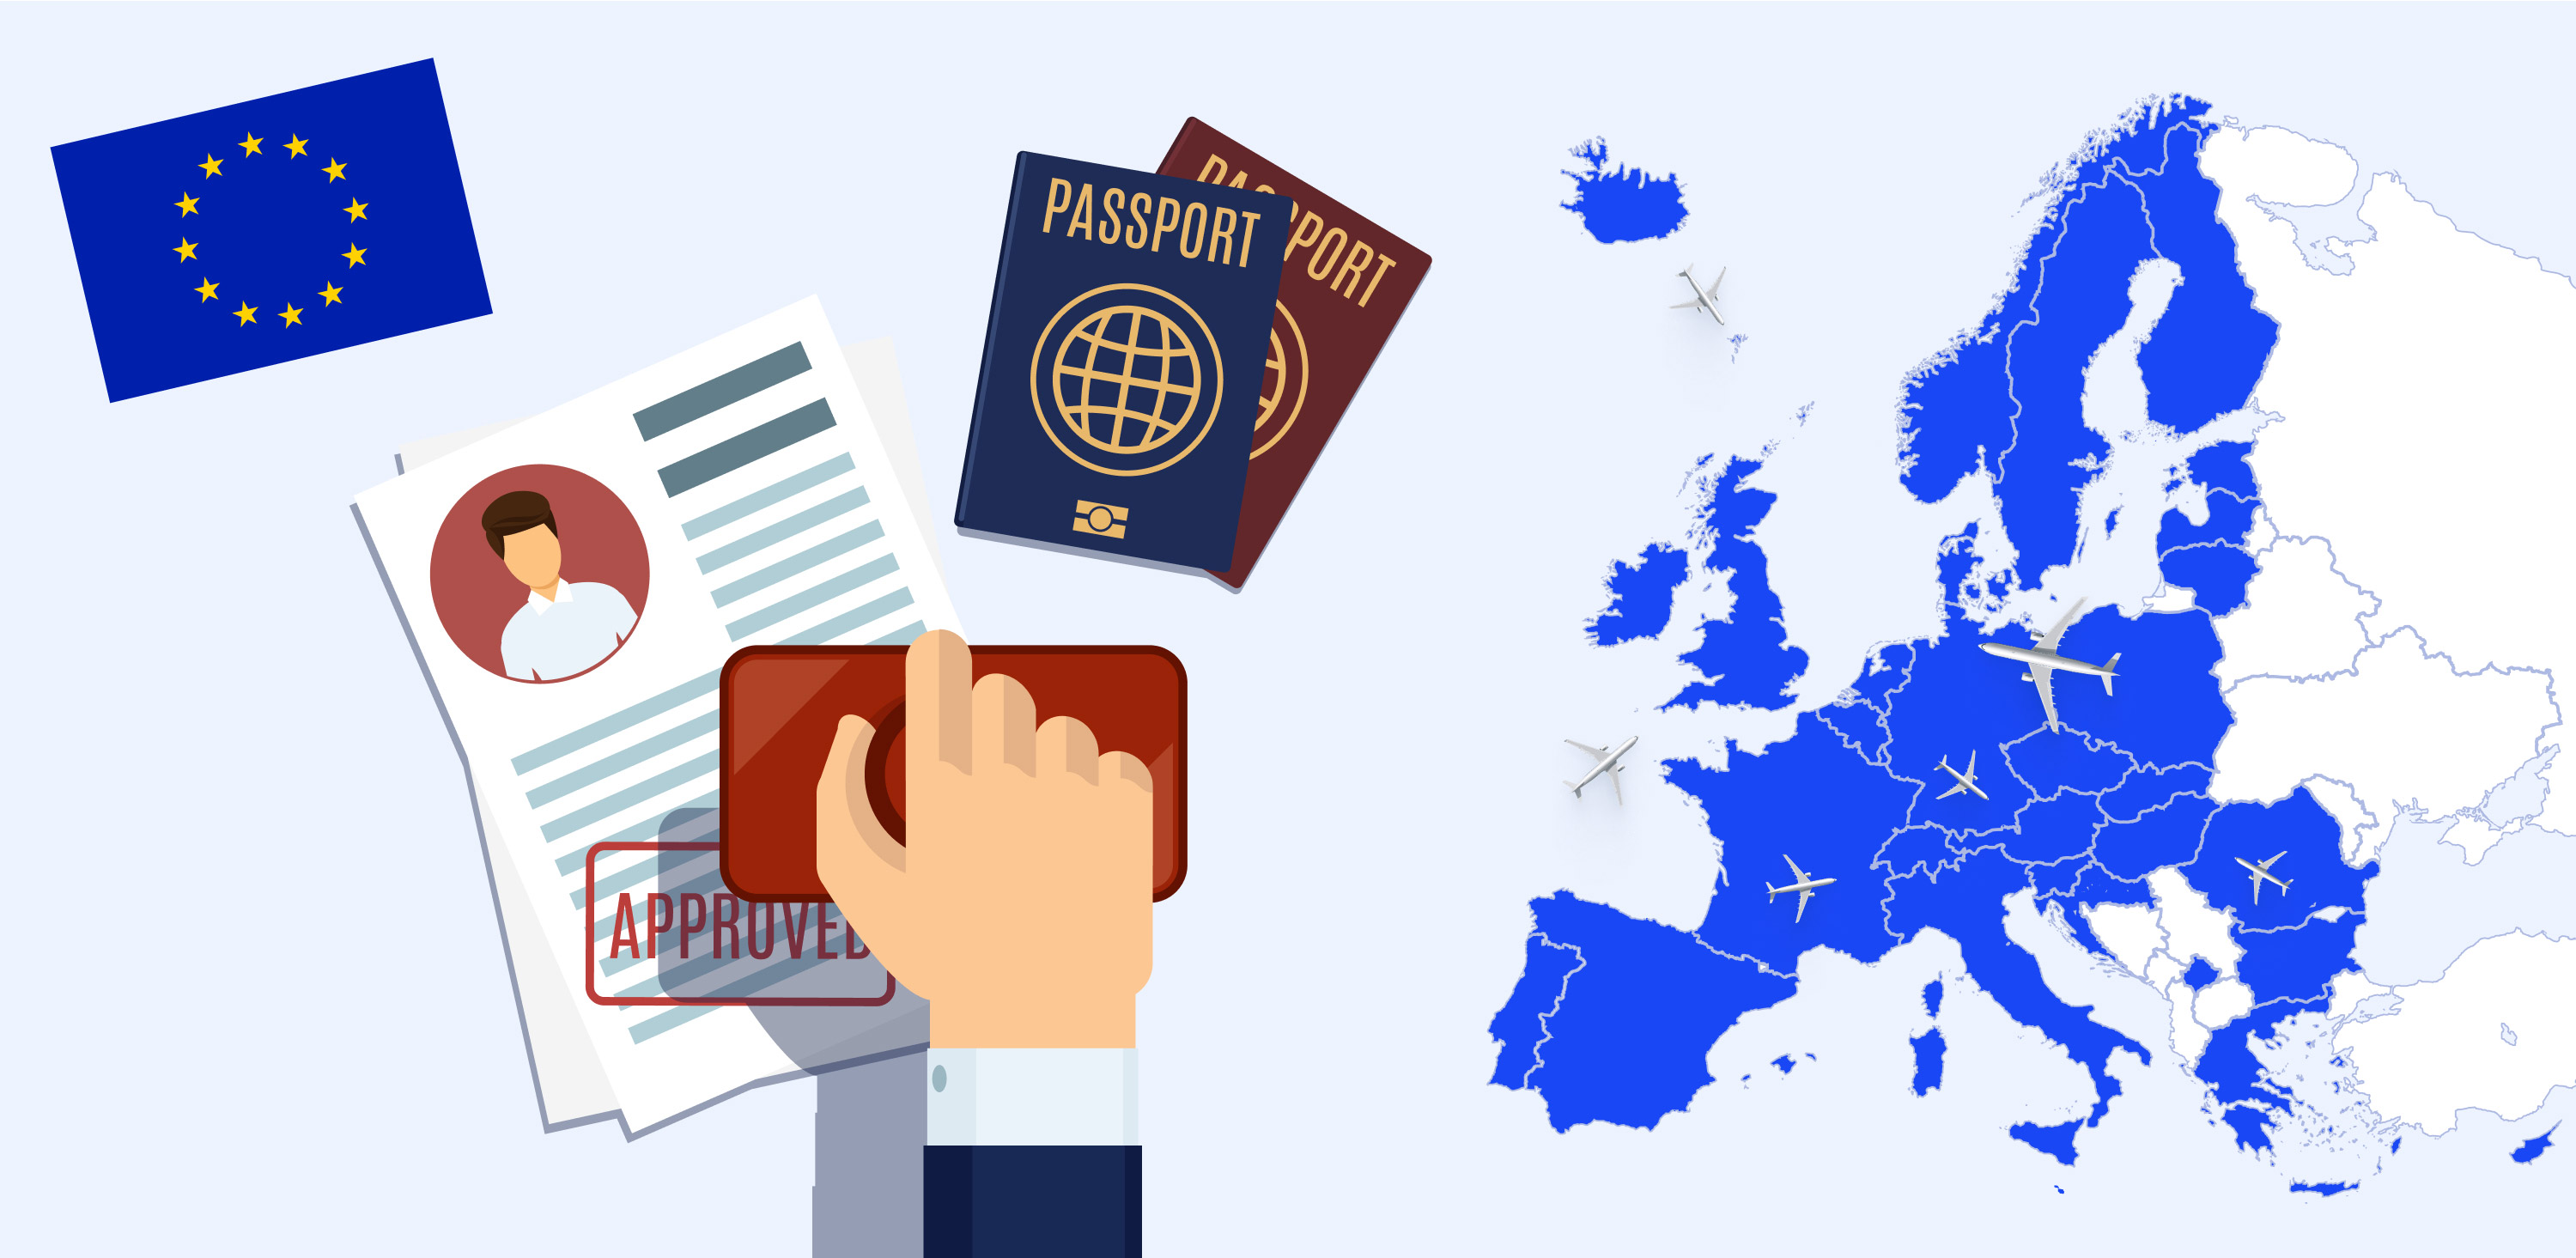 EES and ETIAS will require carriers travelling to most of European countries to validate their passenger data before departure.